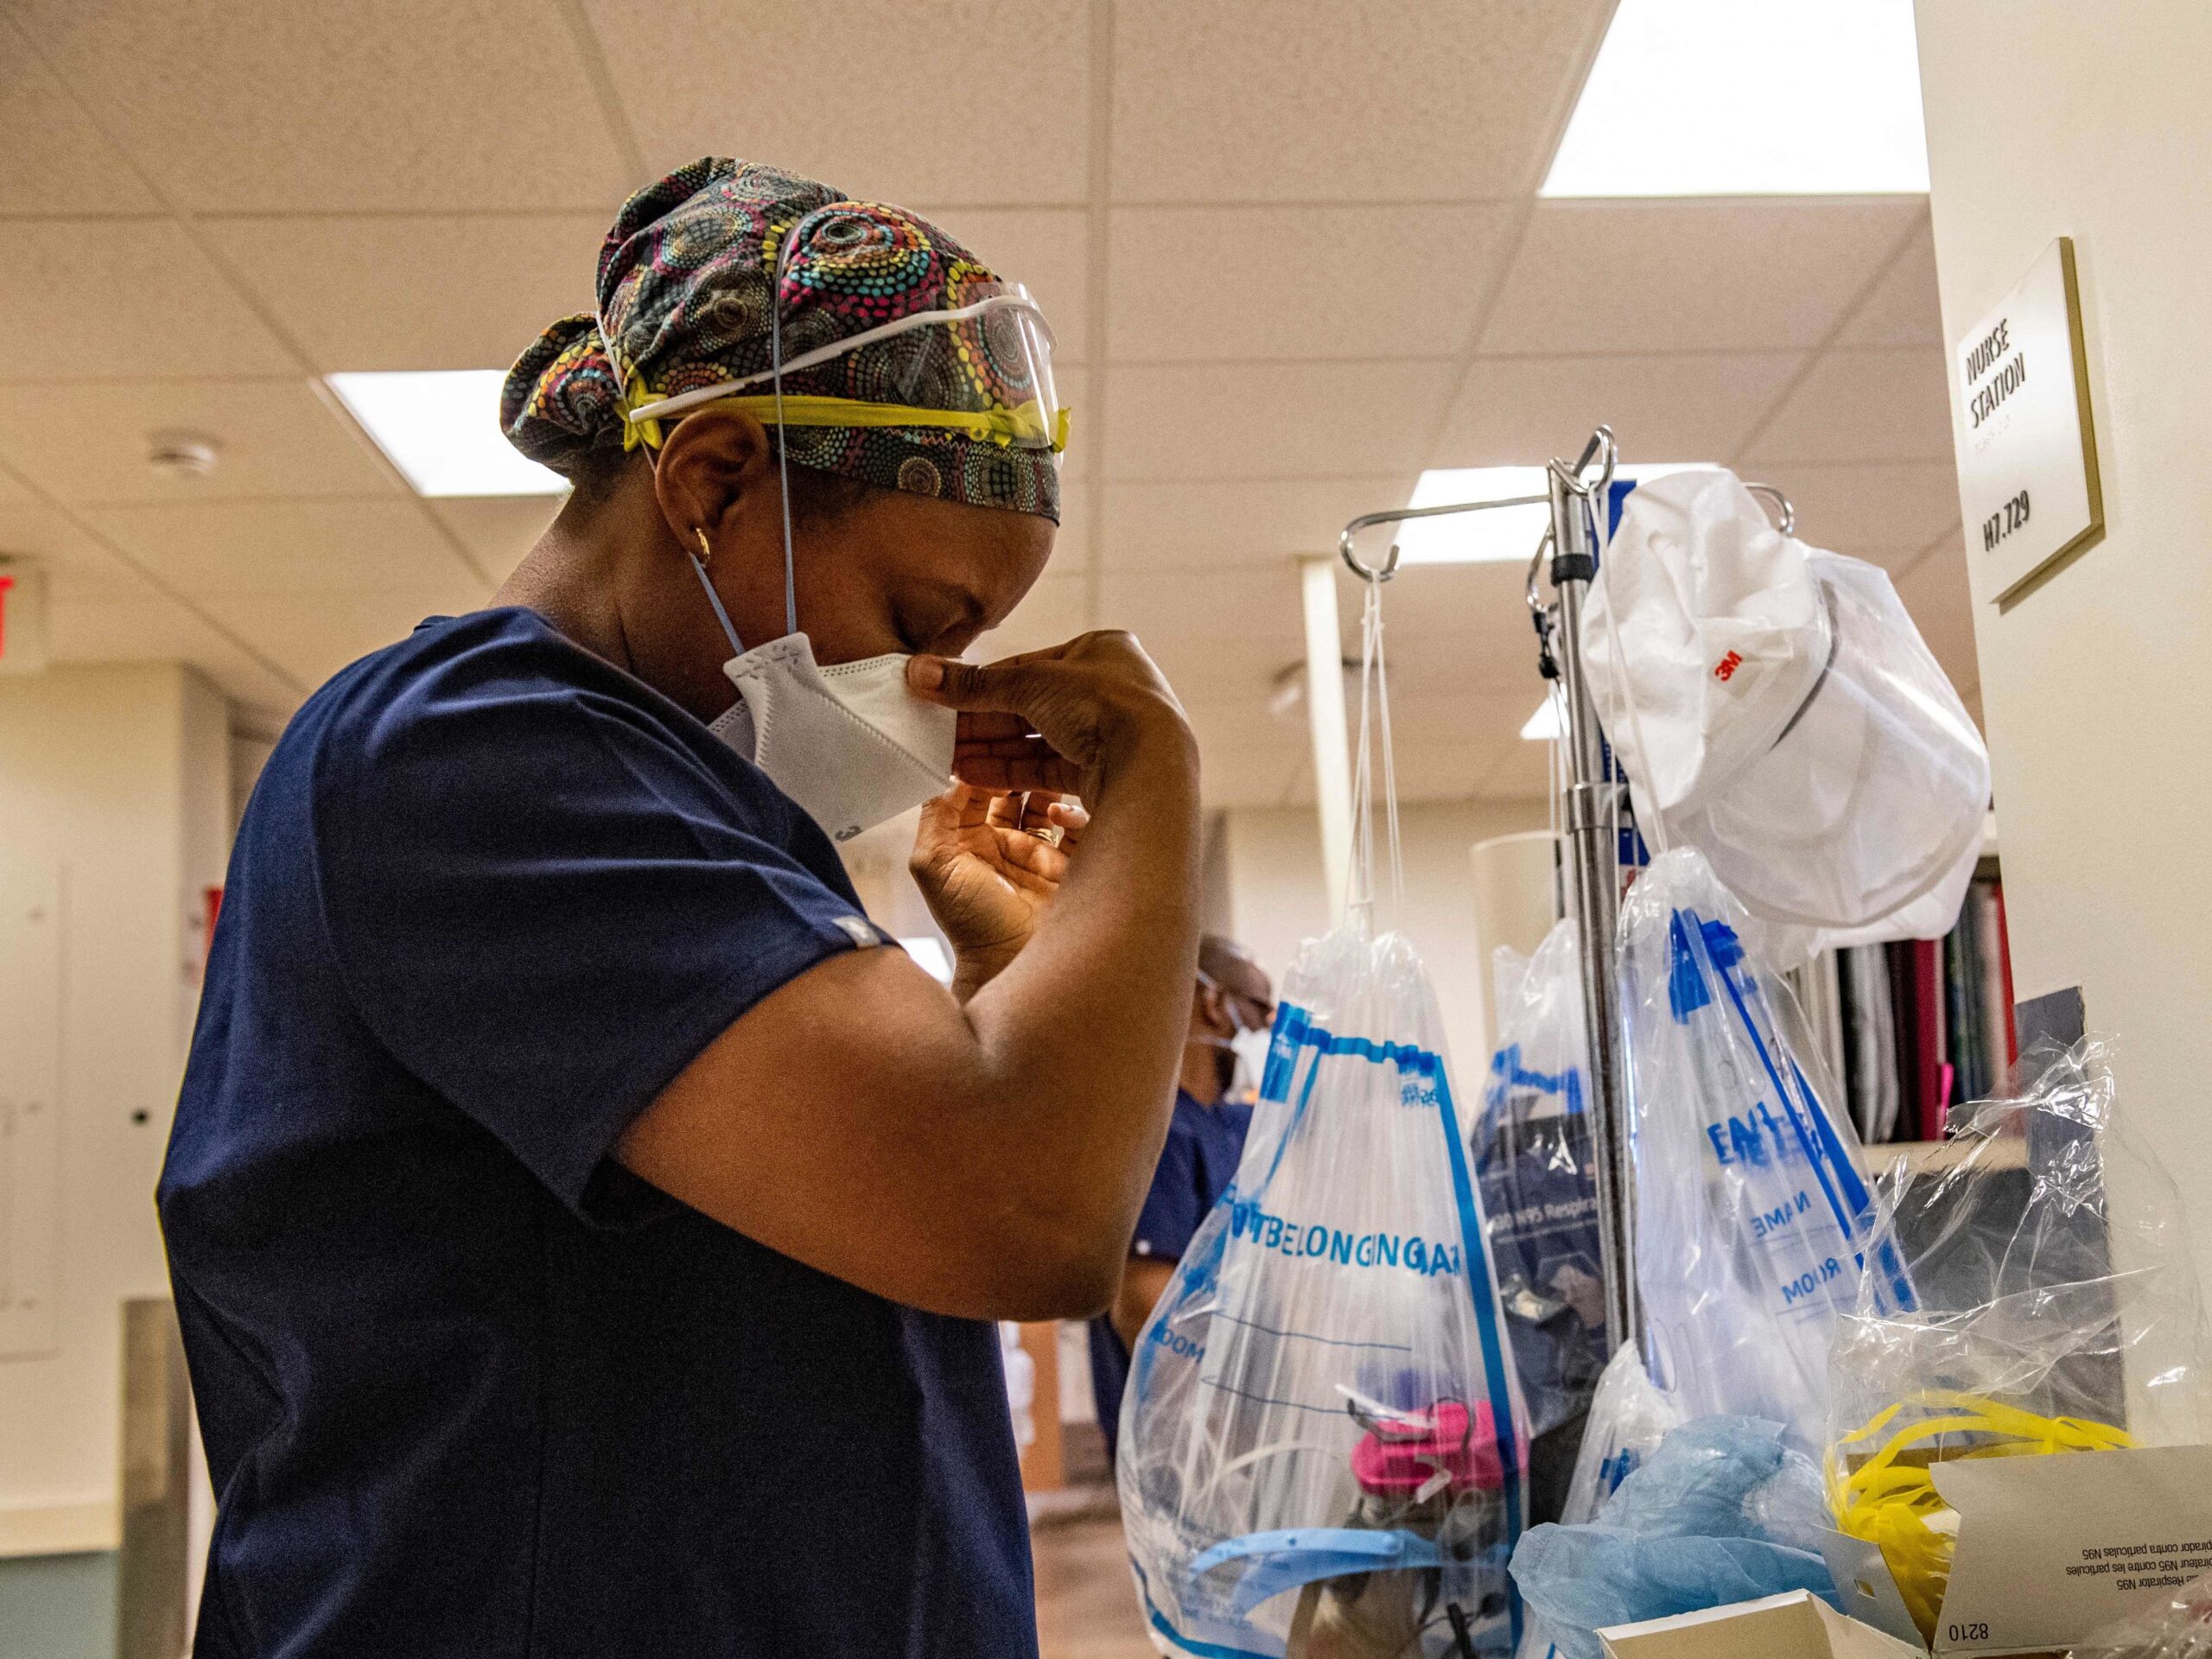 A health care worker fixes her mask.